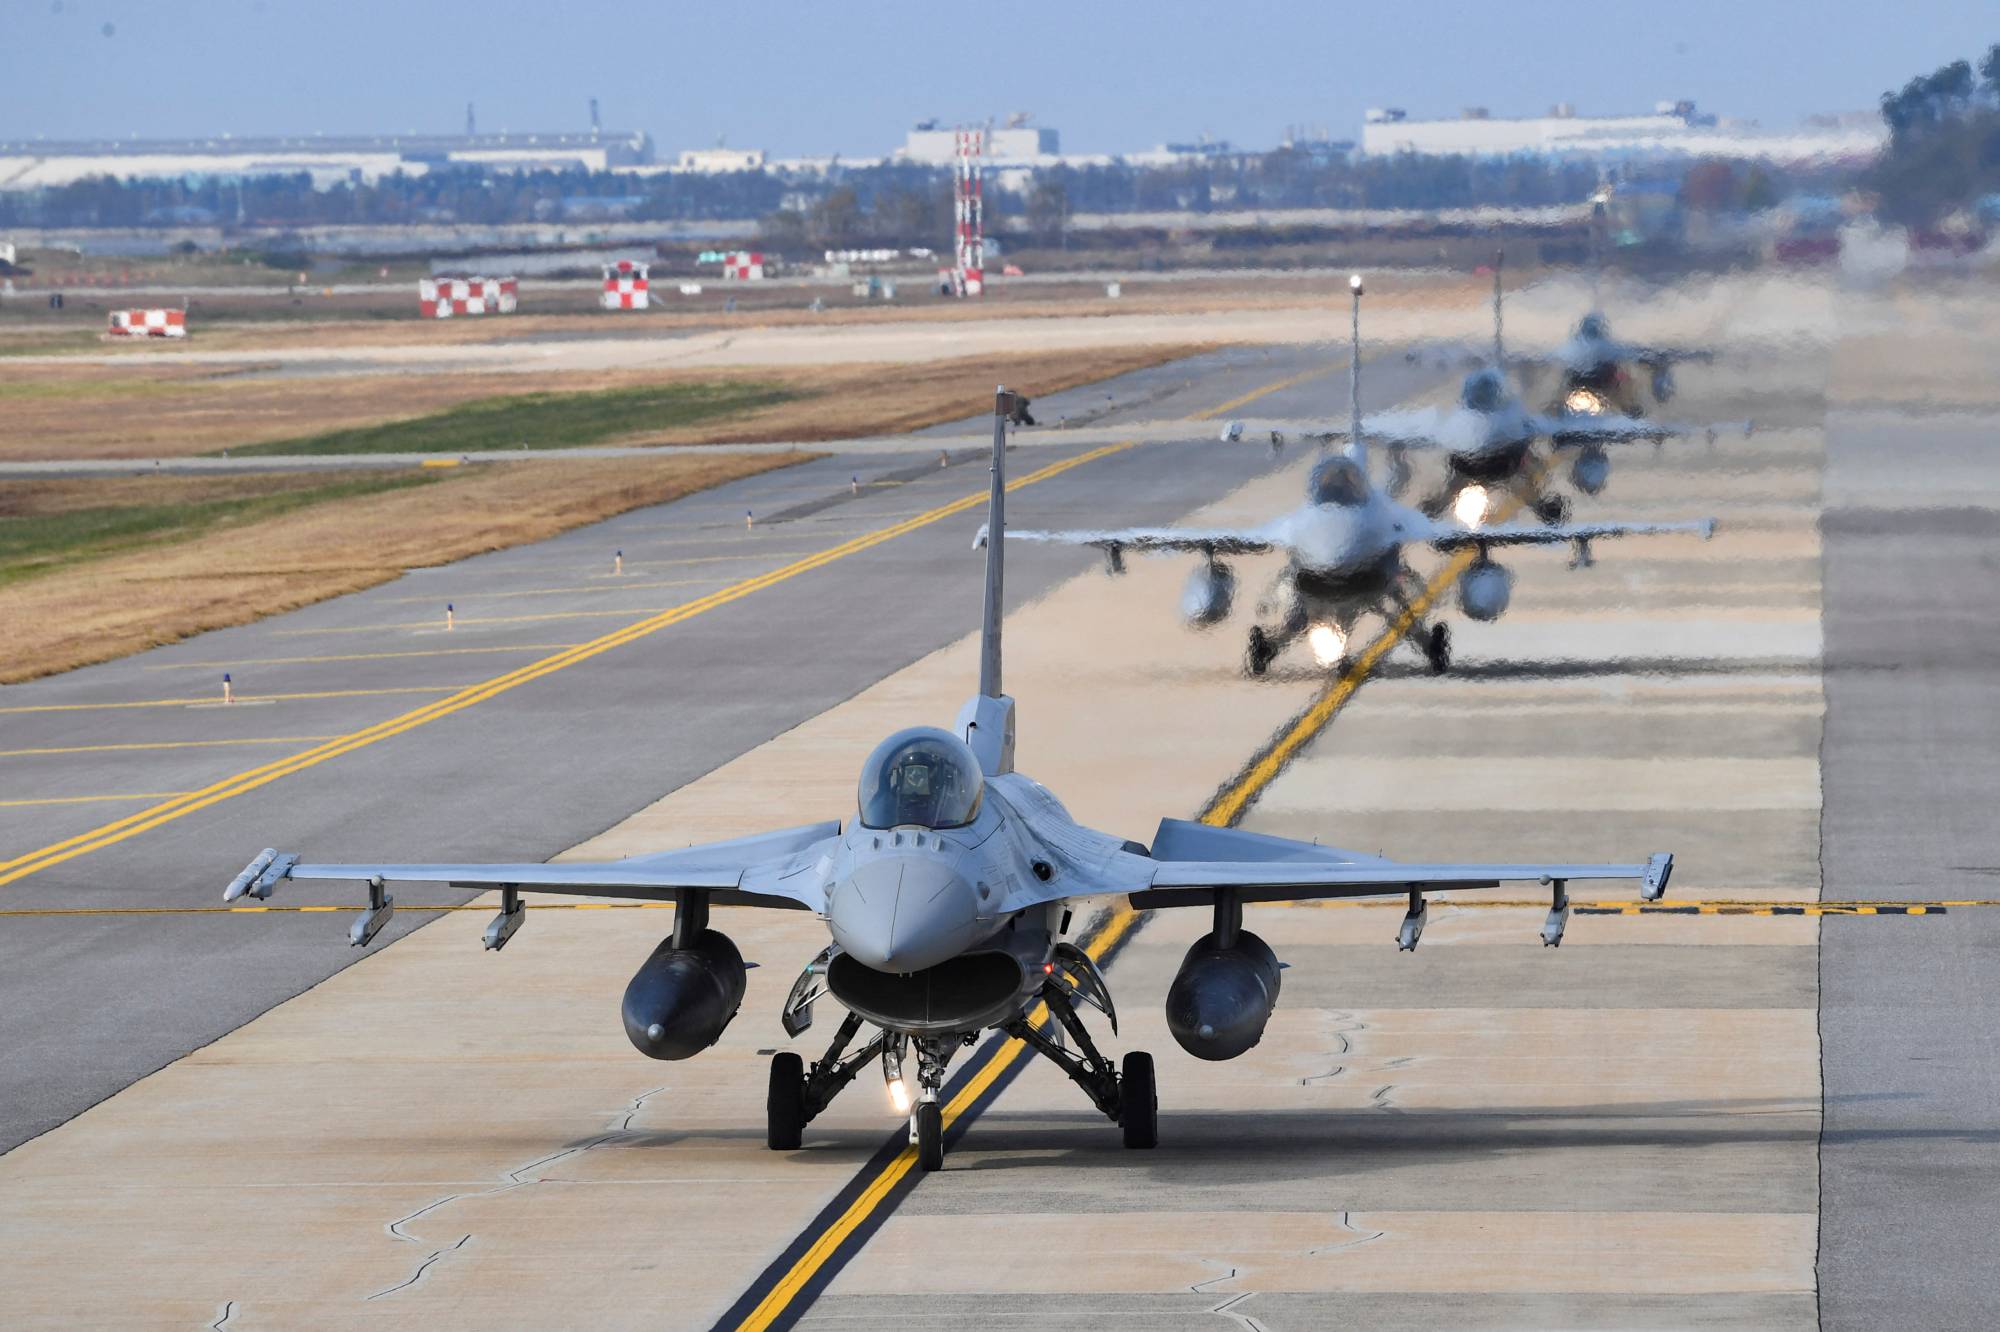 South Korean Air Force KF-16 fighter jets take part in the Vigilant Storm joint South Korean-U.S. air drills at an airbase in Gunsan, South Korea, on Tuesday. | YONHAP / VIA REUTERS 